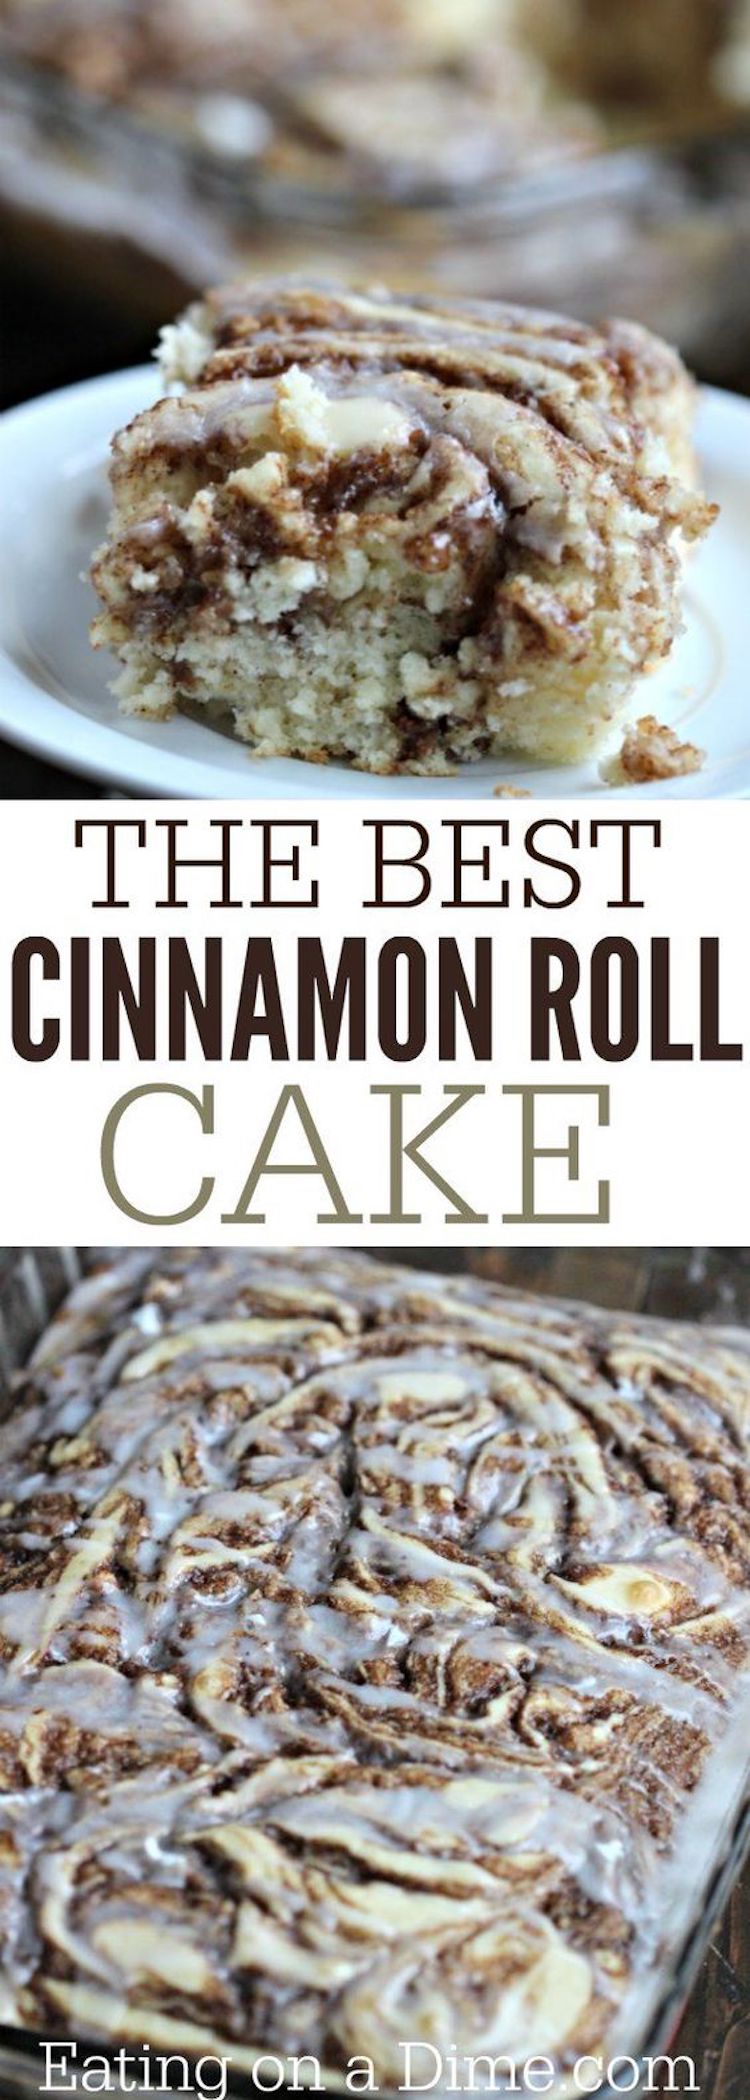 Cinnamon Roll Cake Recipe: I’m so excited to share with your this fun twist to the traditional coffee cake recipe – a Cinnamon Roll Cake recipe. Seriously gals - it is so good!